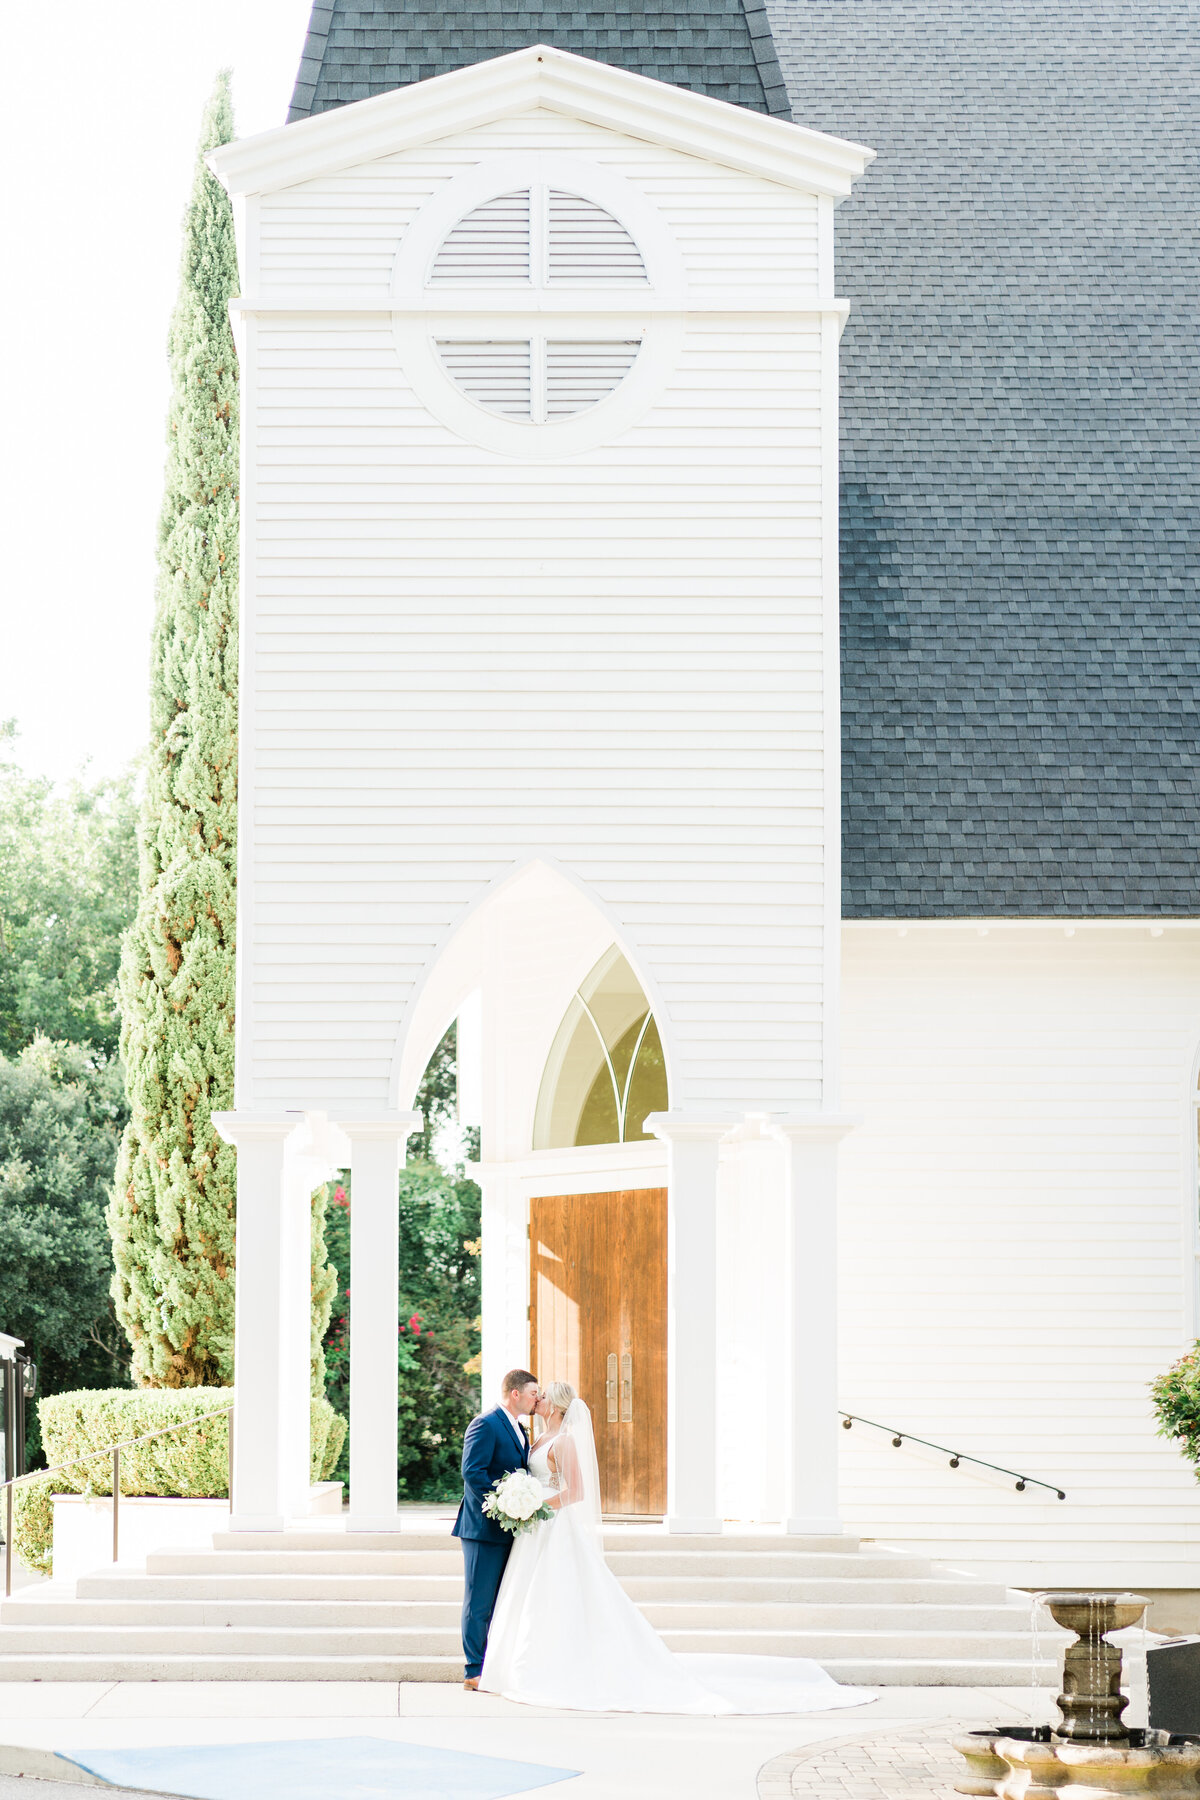 Bride and groom standing outside white church in Alabama